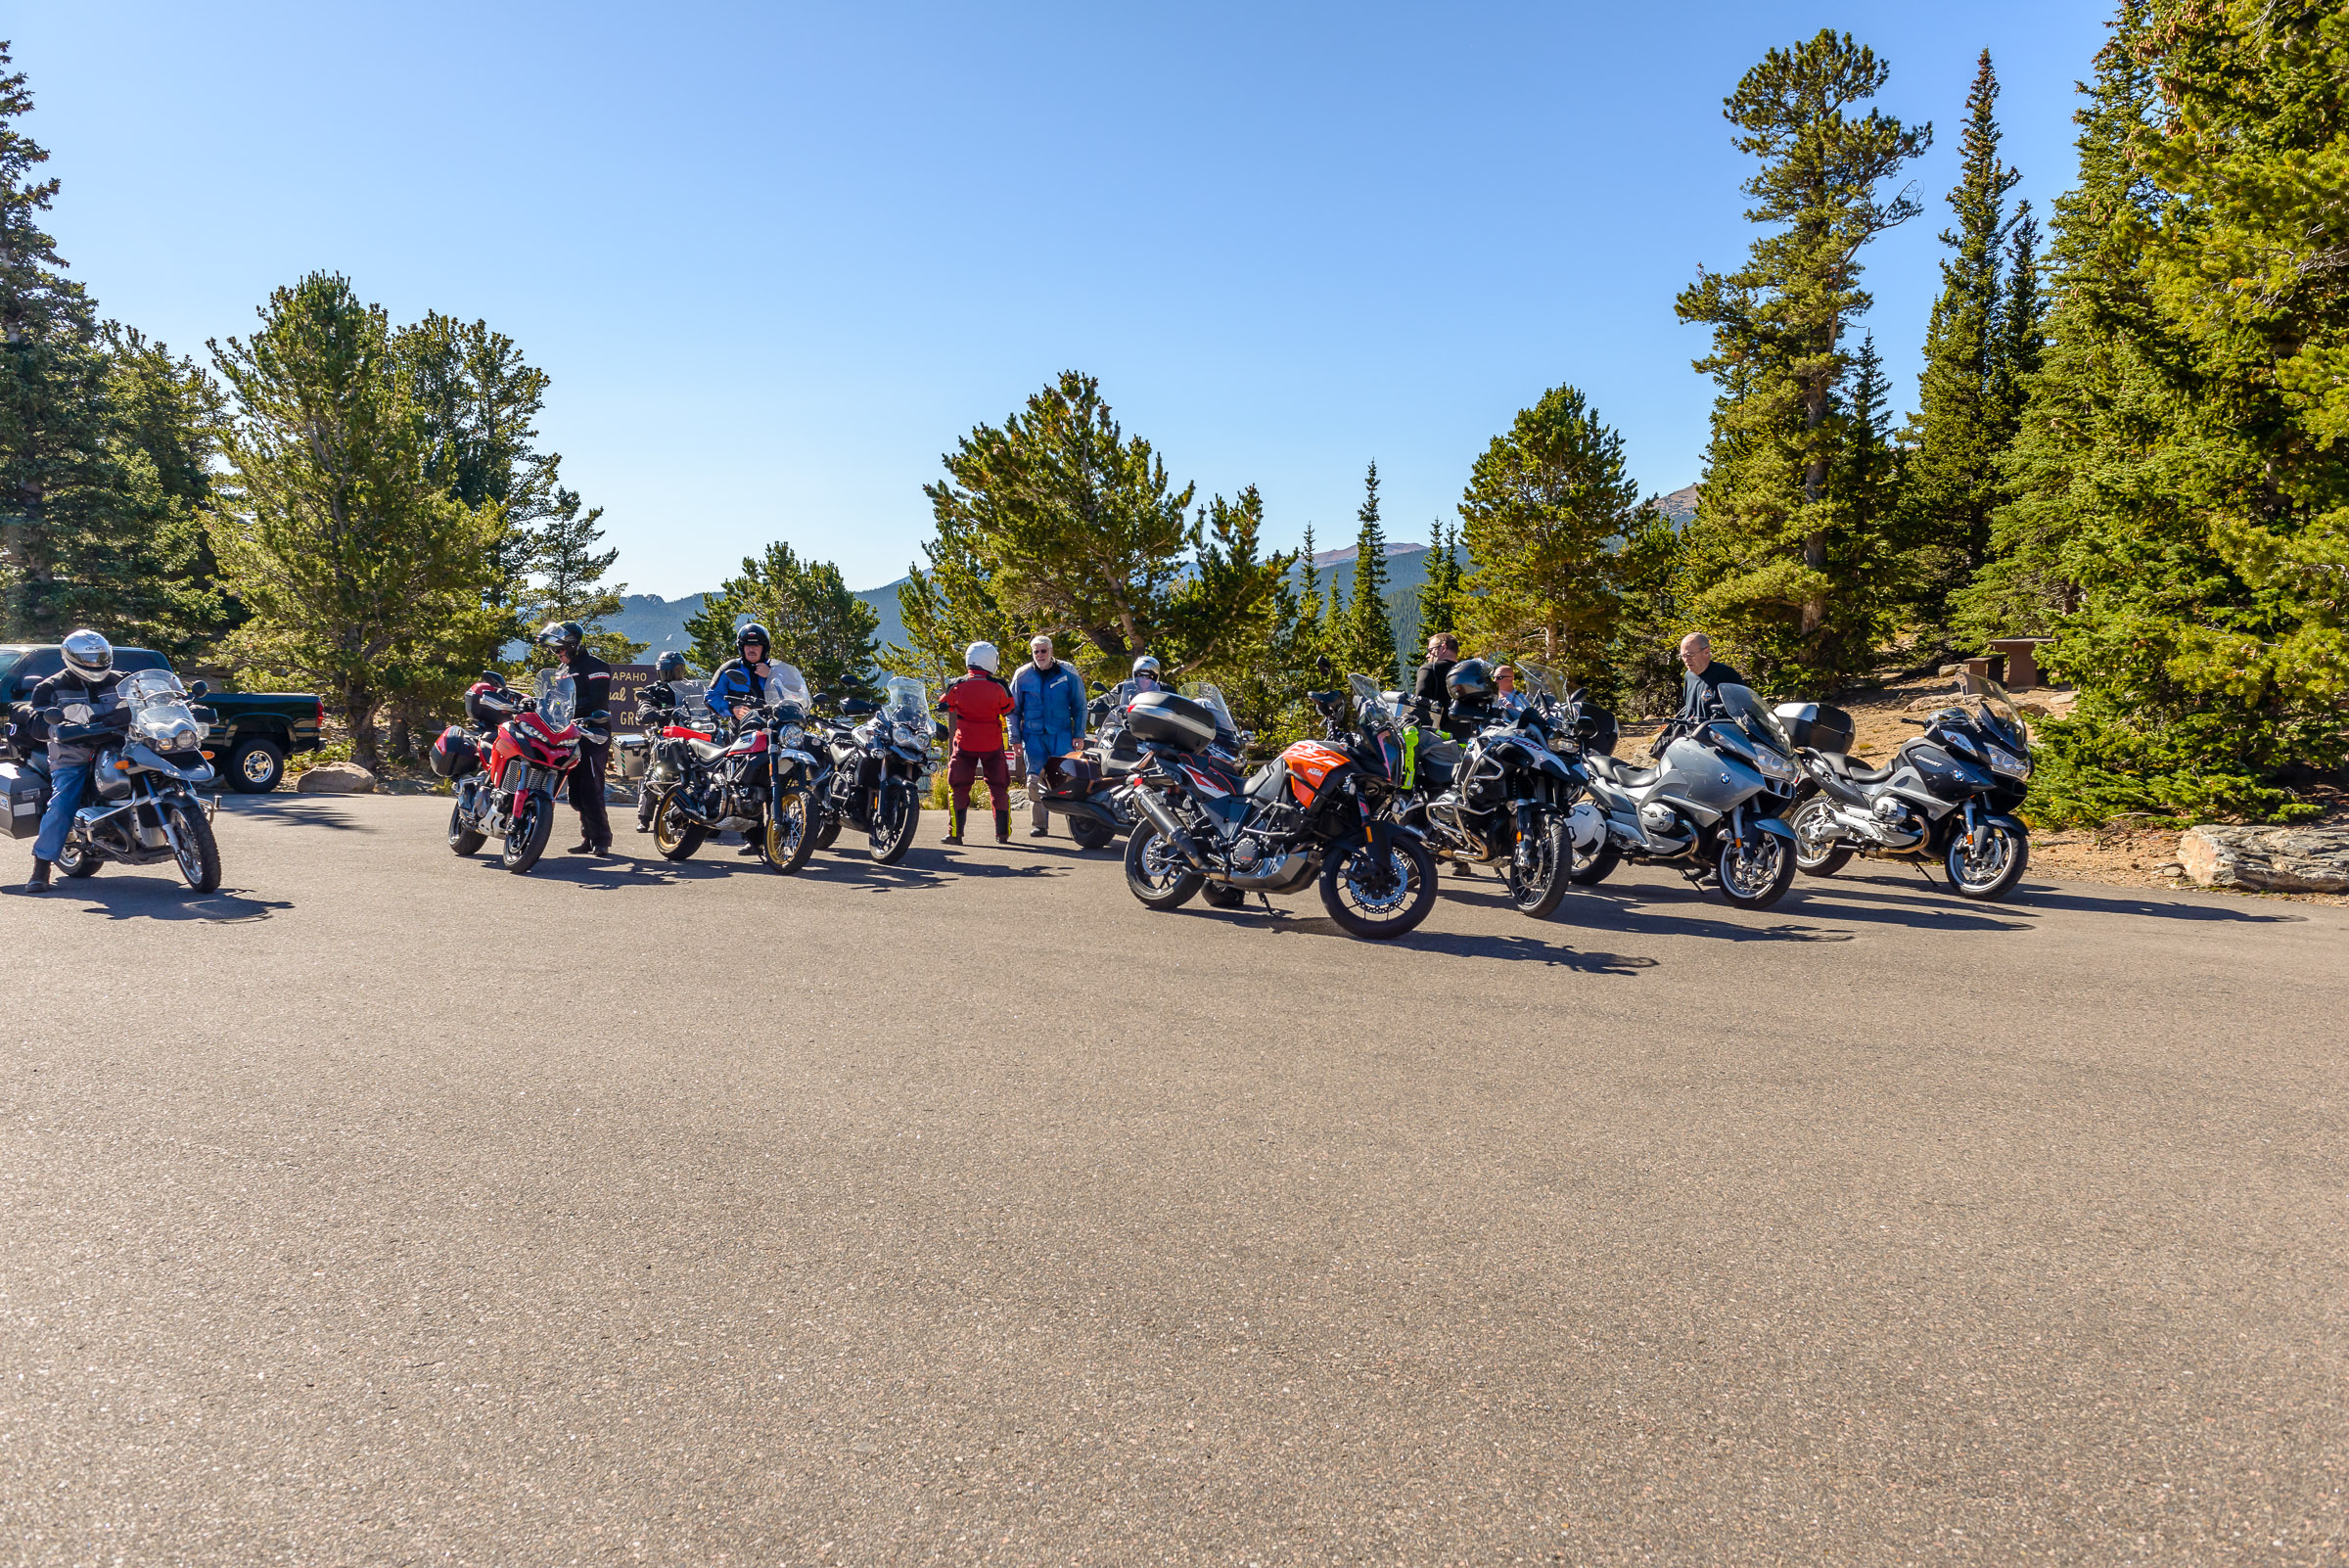 Squaw Pass Road. The  first stop on the BMW Mcy Club Vail loop day ride to  see the leaves. We had 13 bikes.